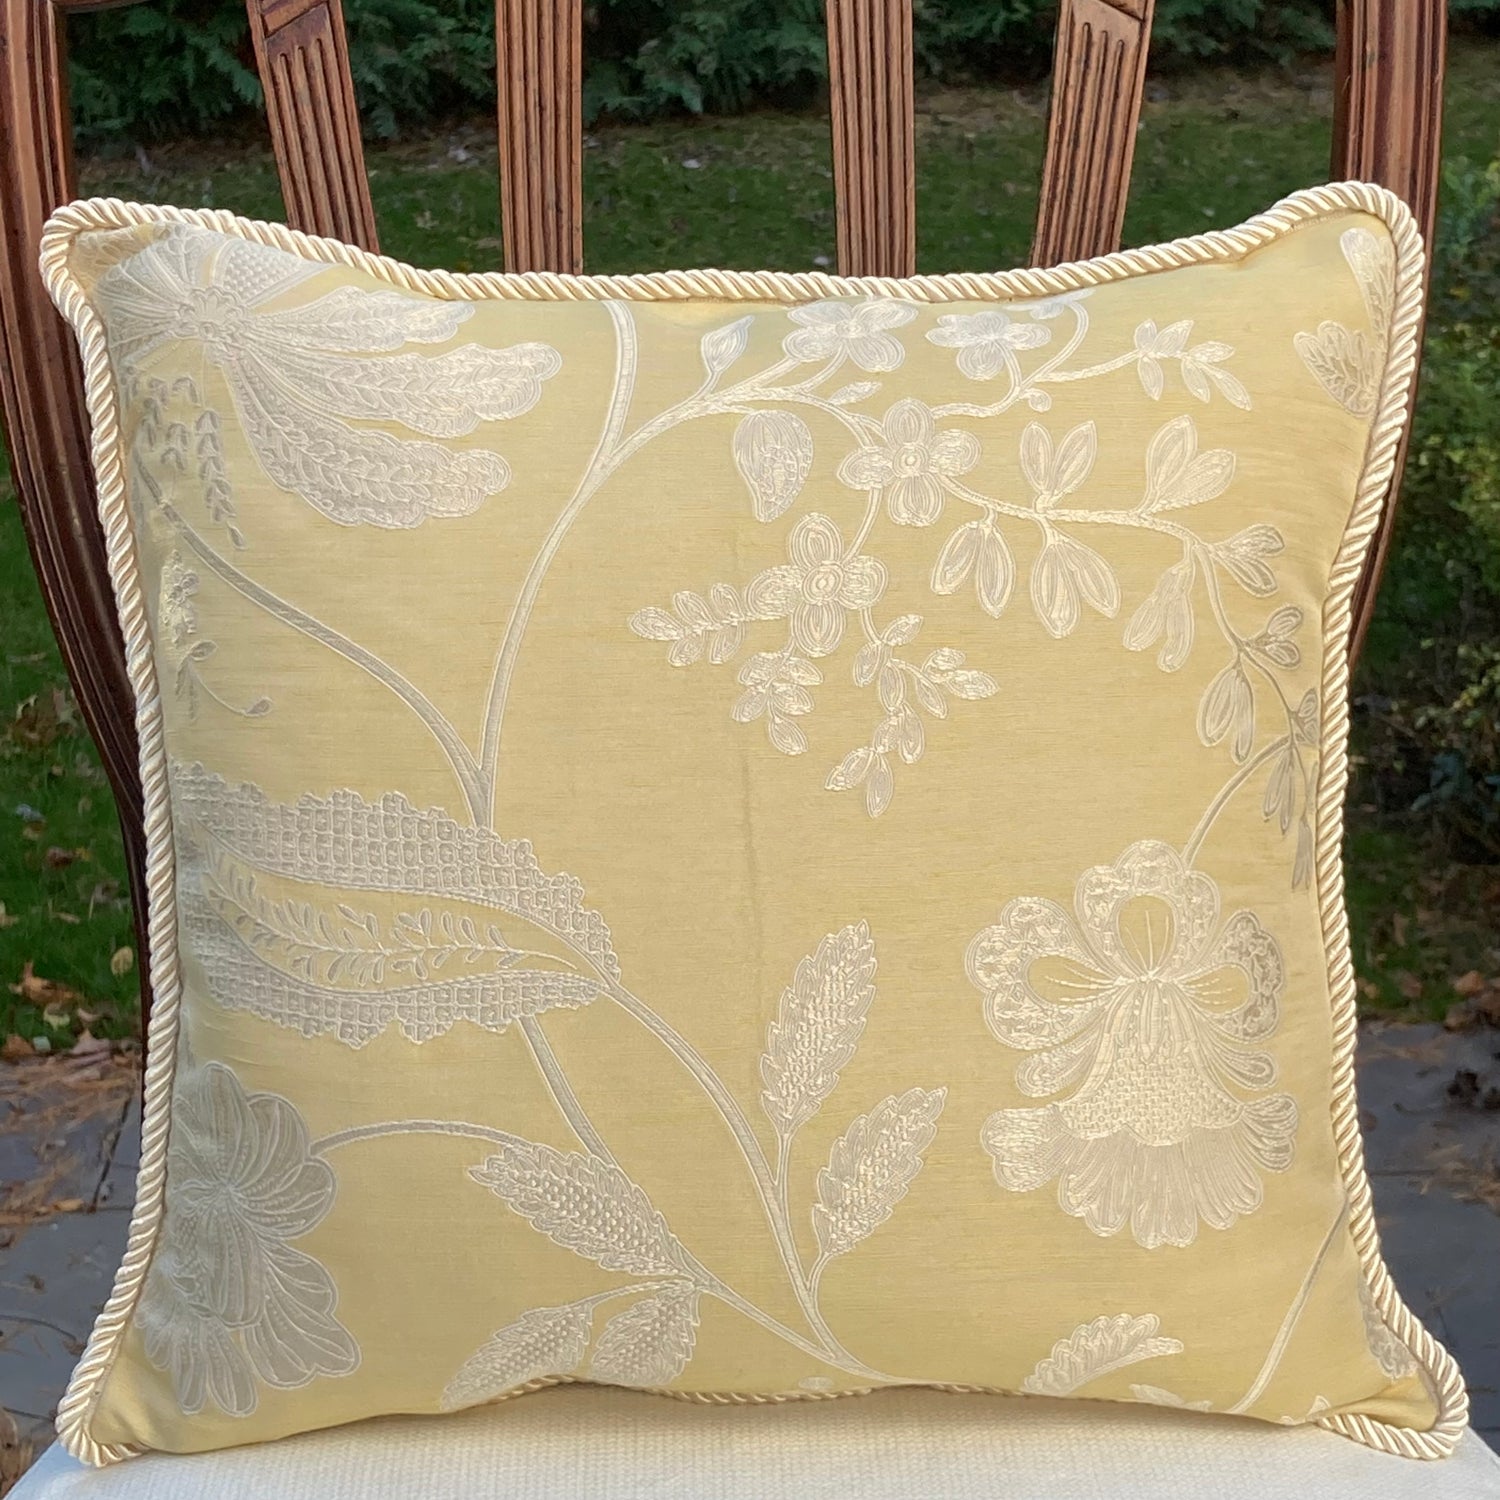 Camille Delicate Wildflowers on Silk 16 X 16 Square Designer Pillow with Down Feather Insert